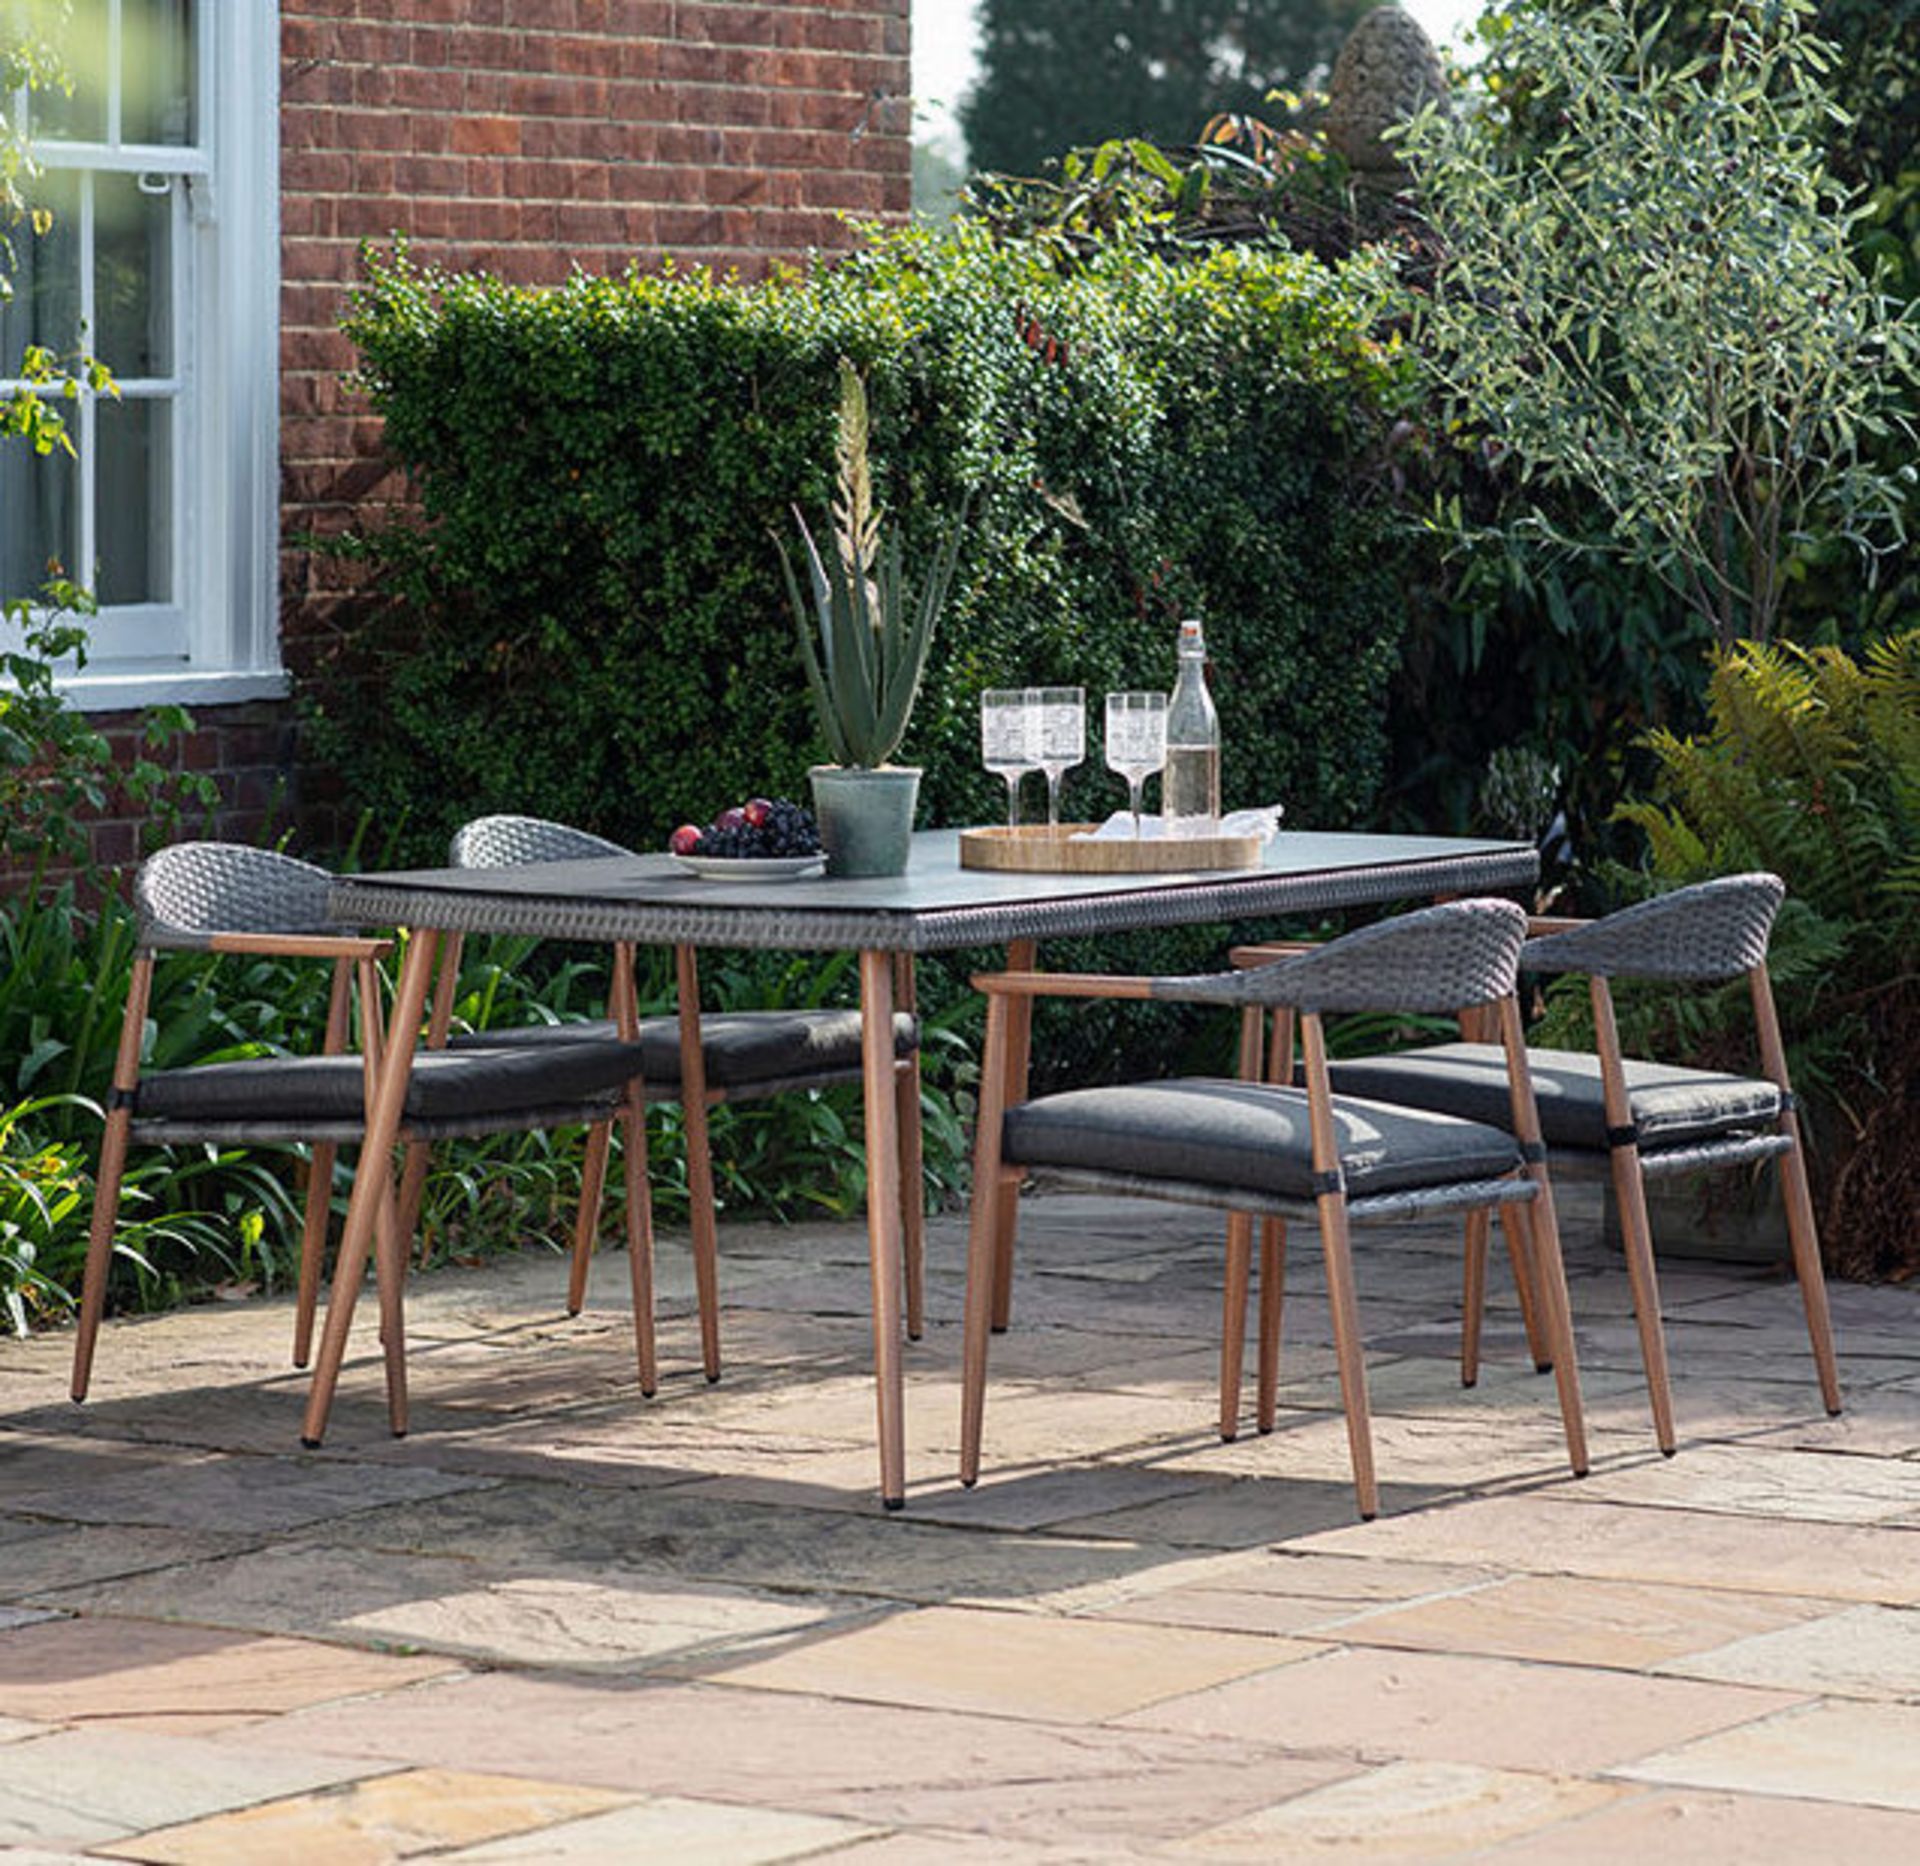 John Lewis Braided 4-Seater Garden Dining Table & Chairs Set, Grey - PRICED £1,170